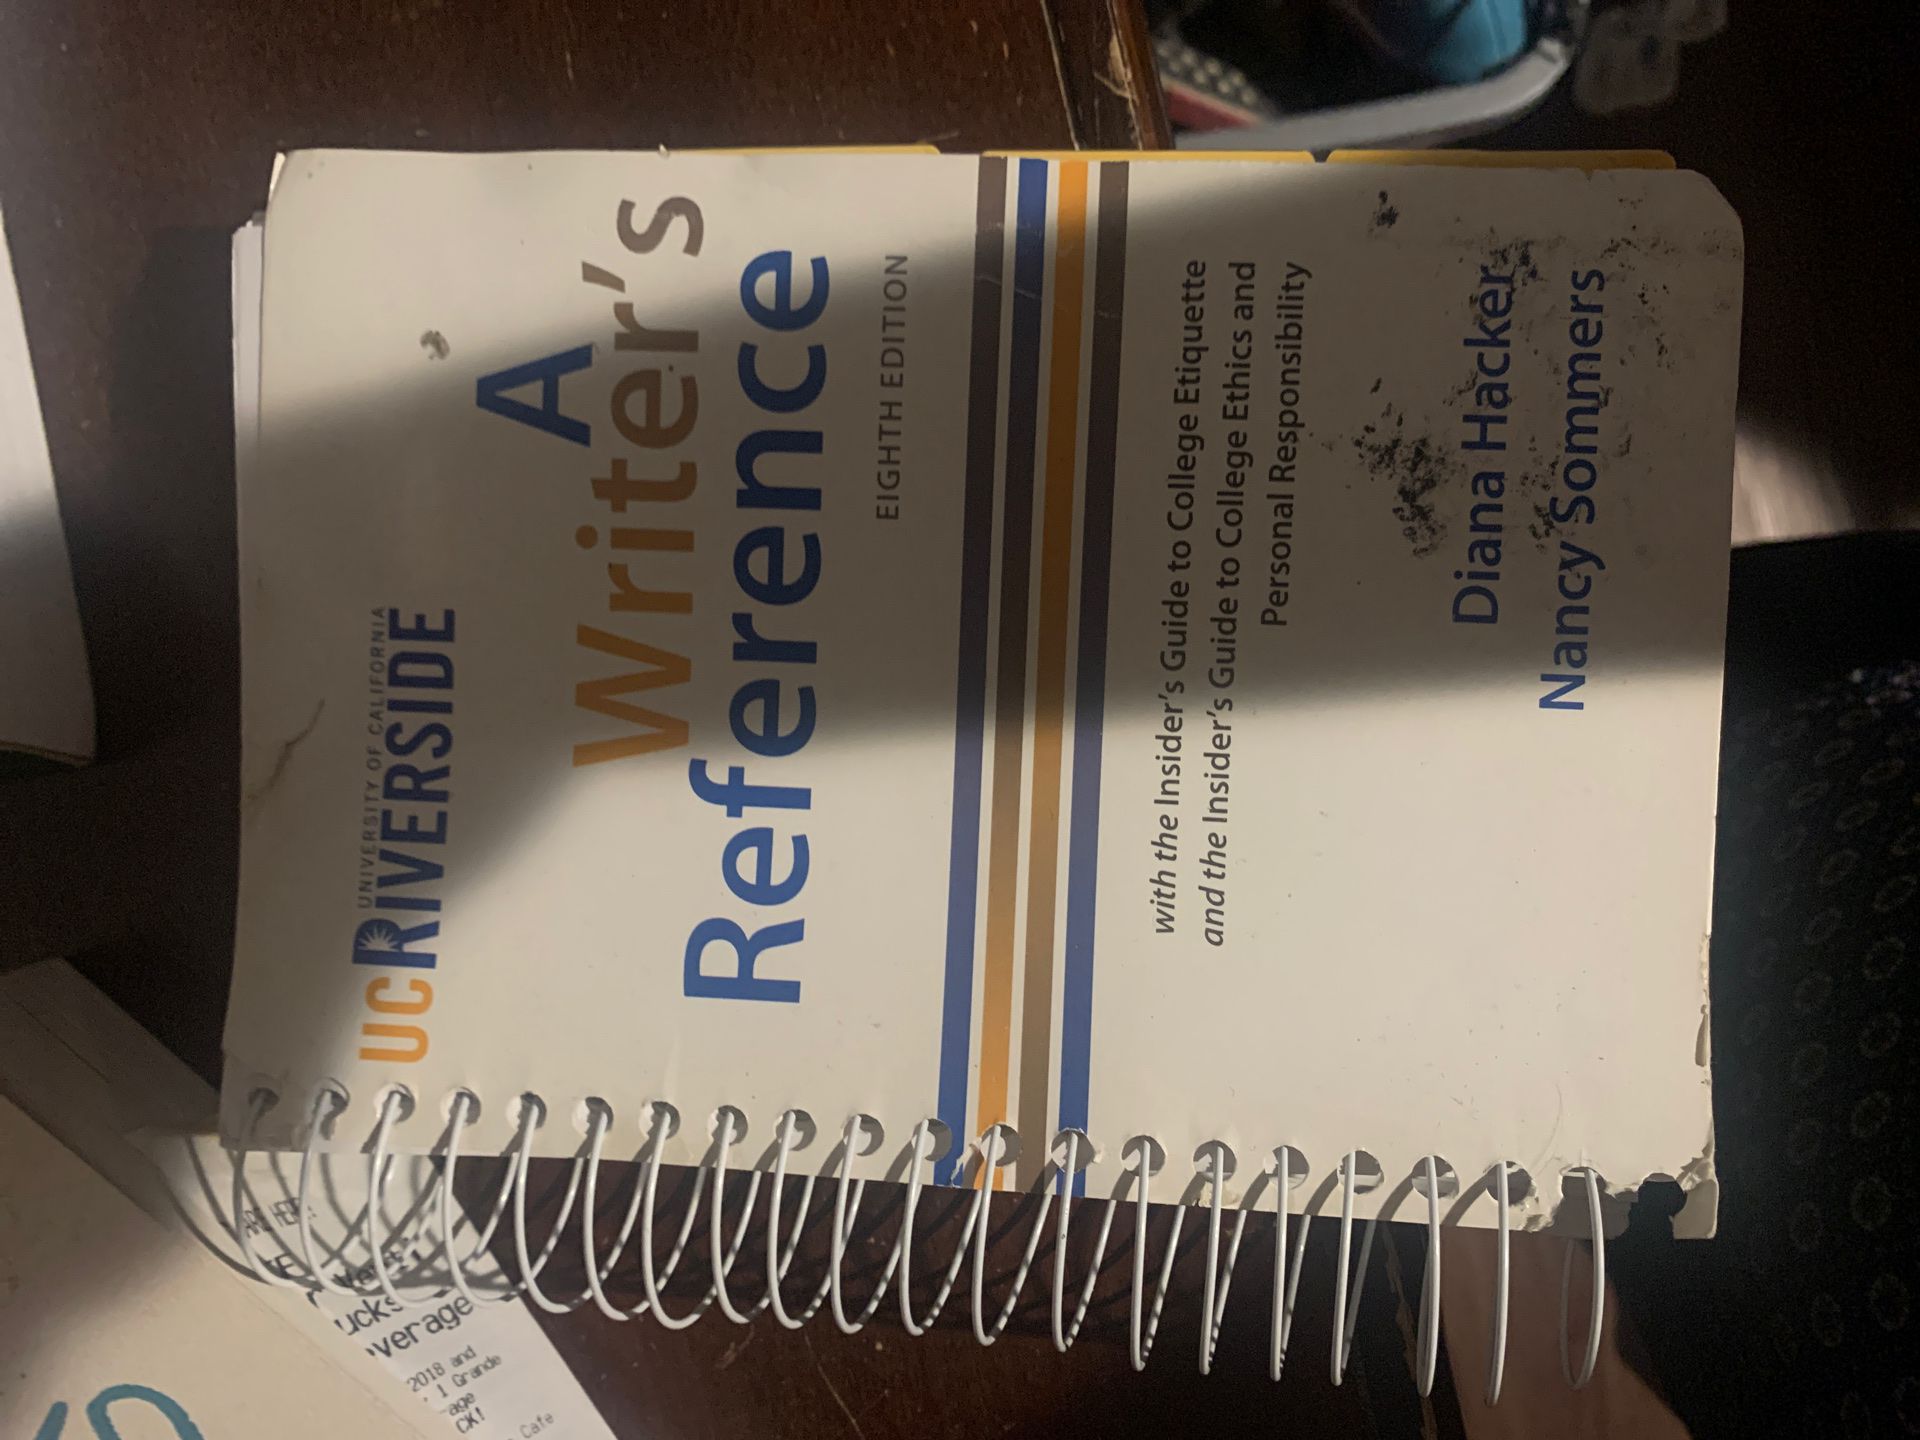 UCR book a writer’s reference